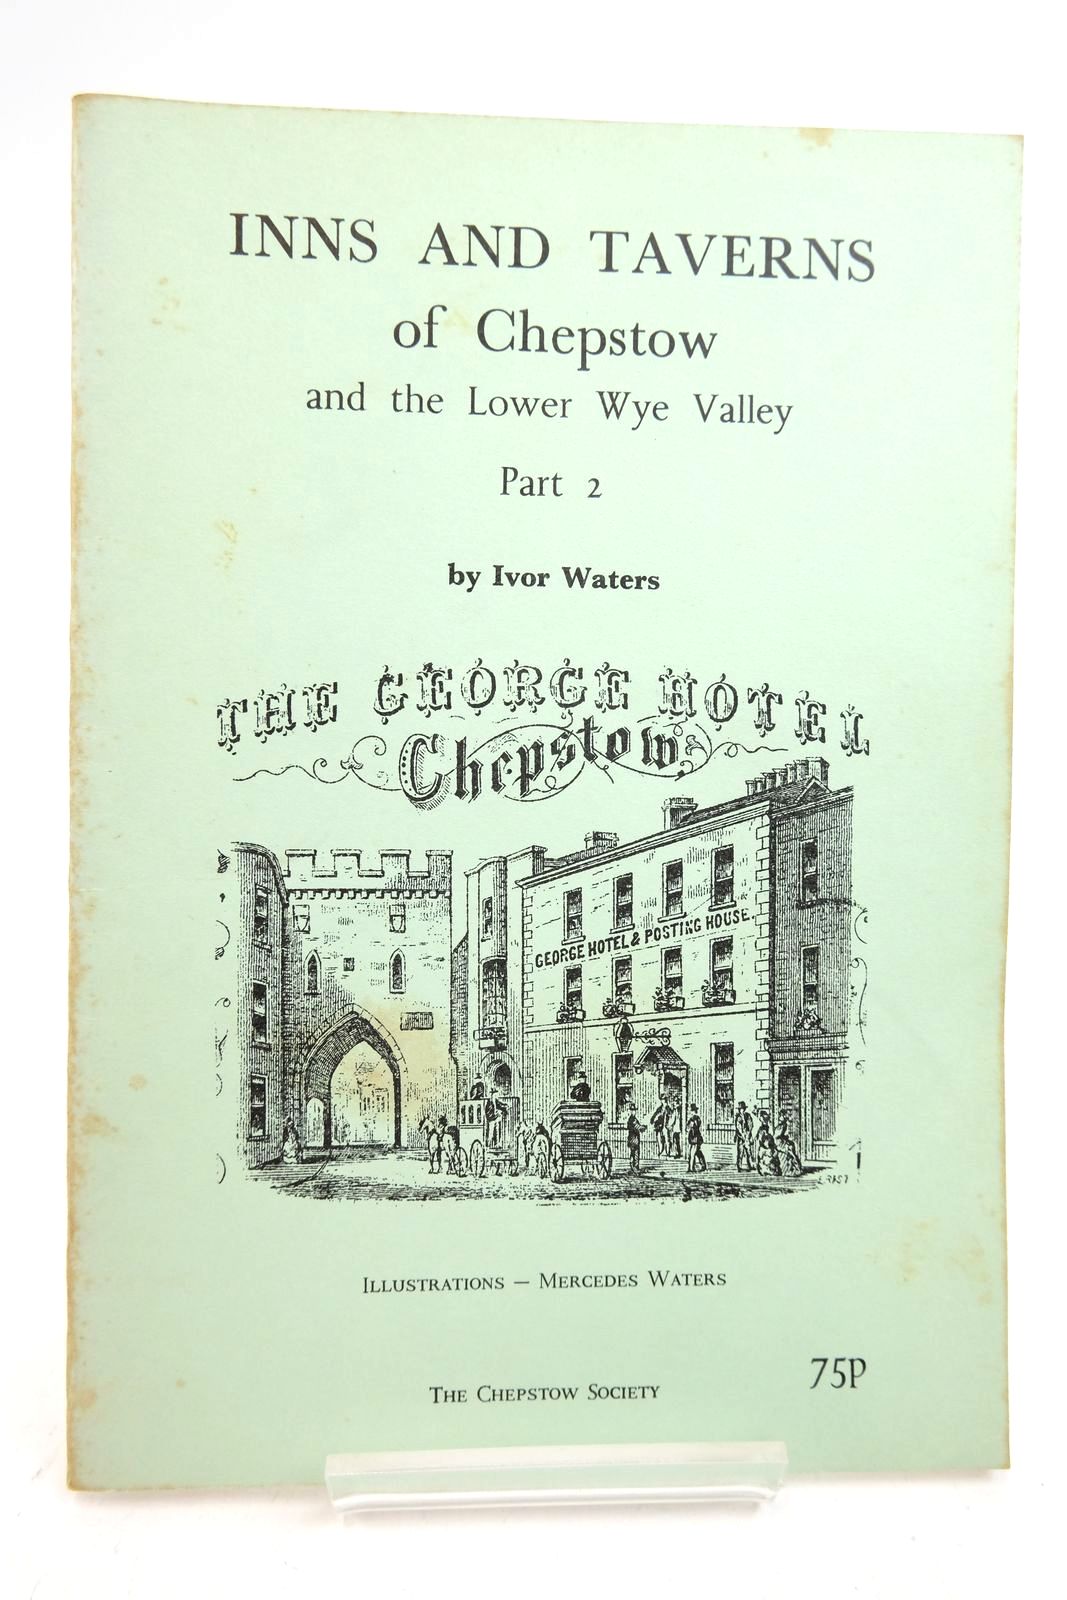 Photo of INNS AND TAVERNS OF CHEPSTOW AND THE LOWER WYE VALLEY PART 2 written by Waters, Ivor illustrated by Waters, Mercedes published by The Chepstow Society (STOCK CODE: 2140173)  for sale by Stella & Rose's Books